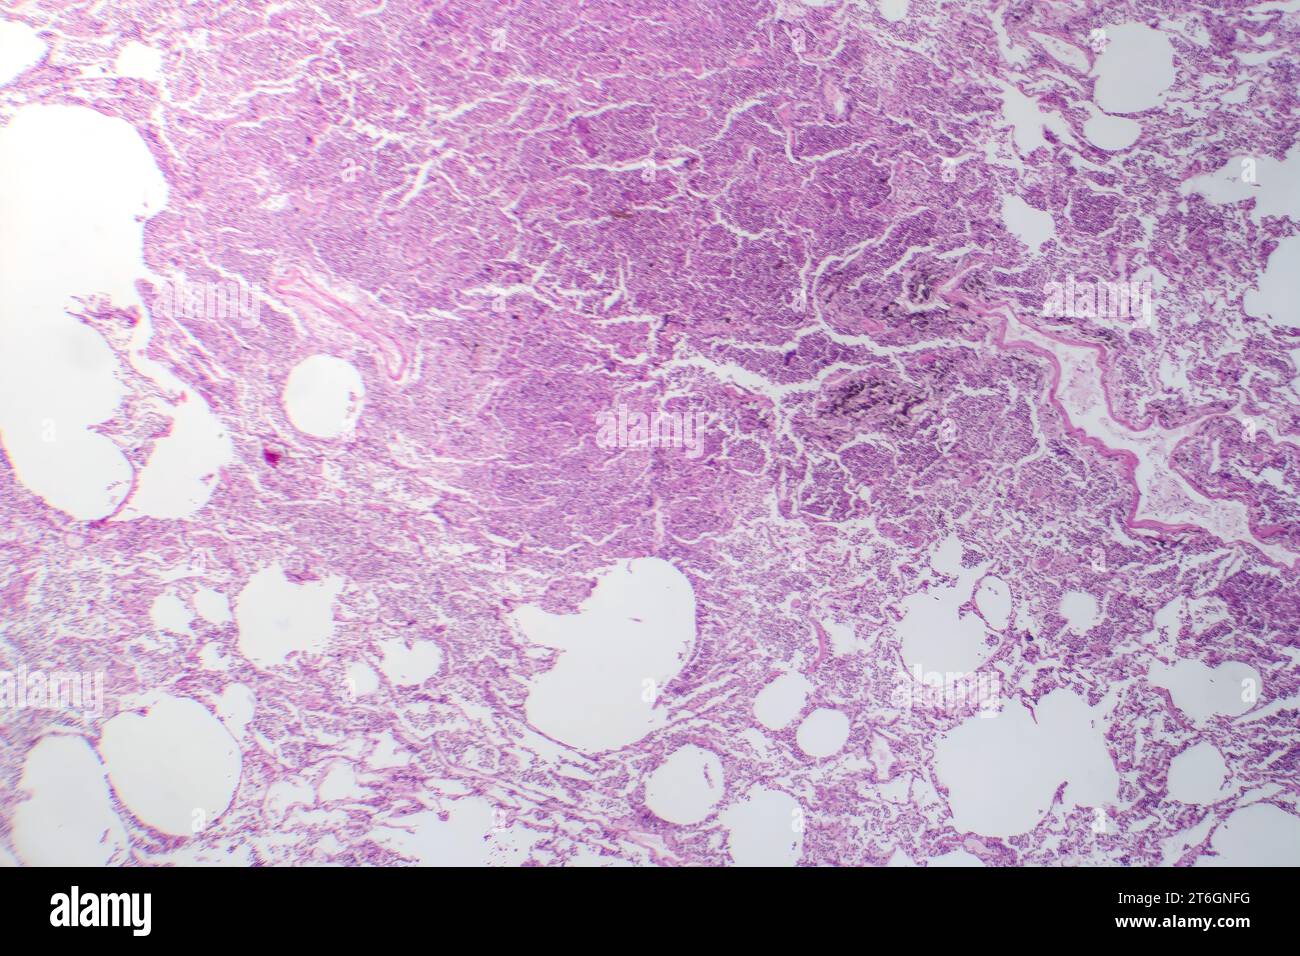 Photomicrograph of interstitial pneumonia, showing inflammation and fibrosis in the lung's interstitial tissue. Stock Photo